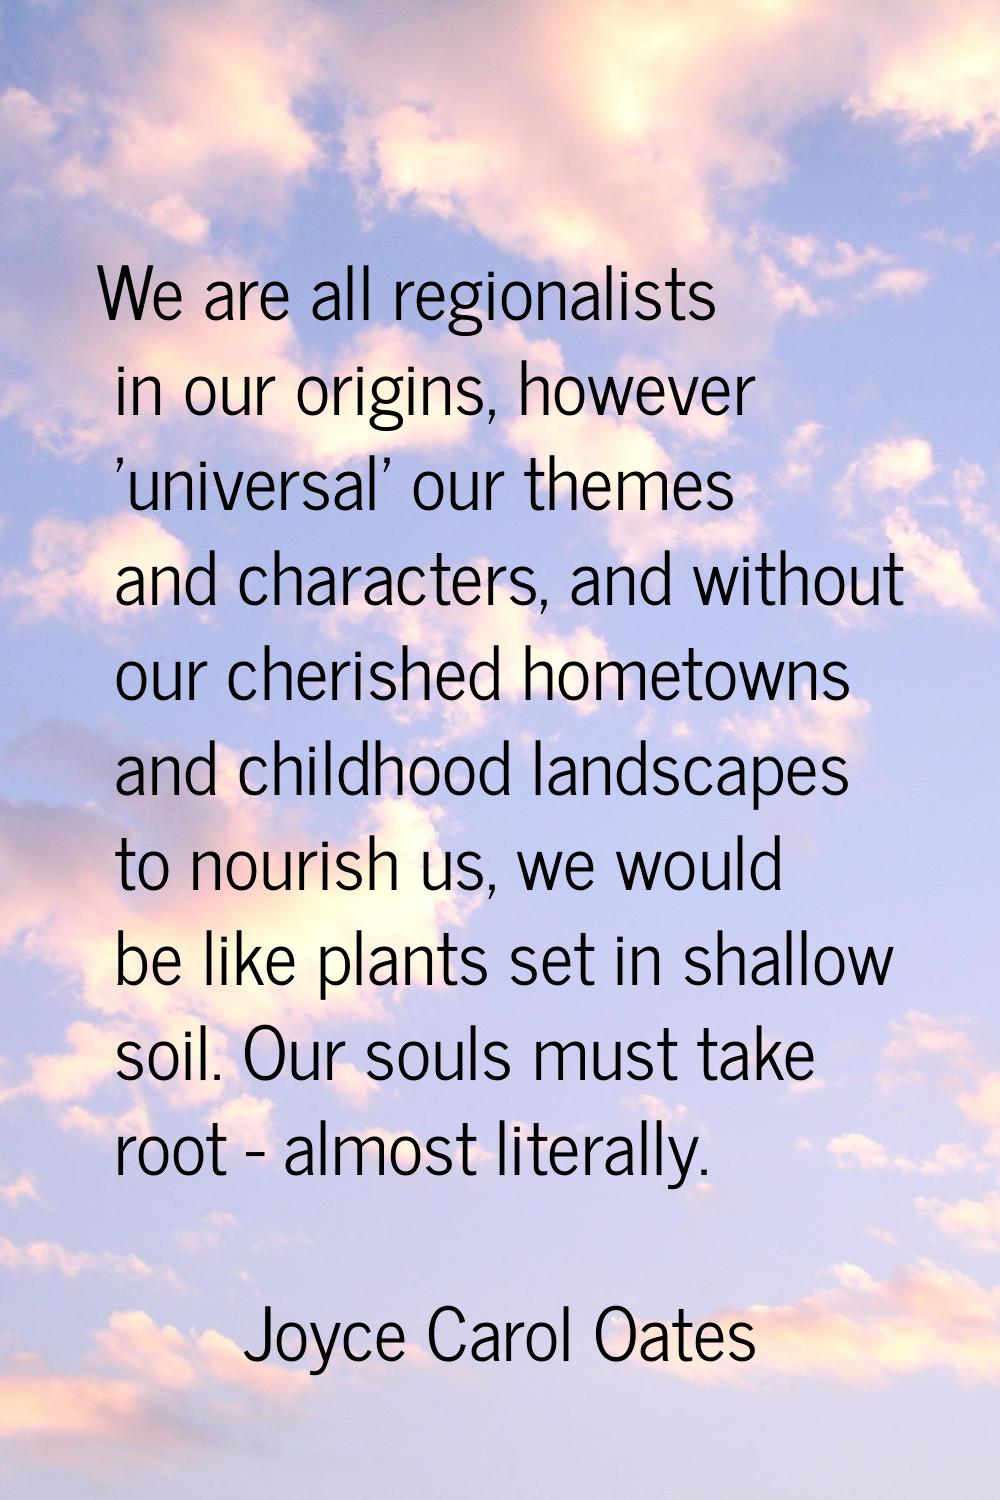 We are all regionalists in our origins, however 'universal' our themes and characters, and without 